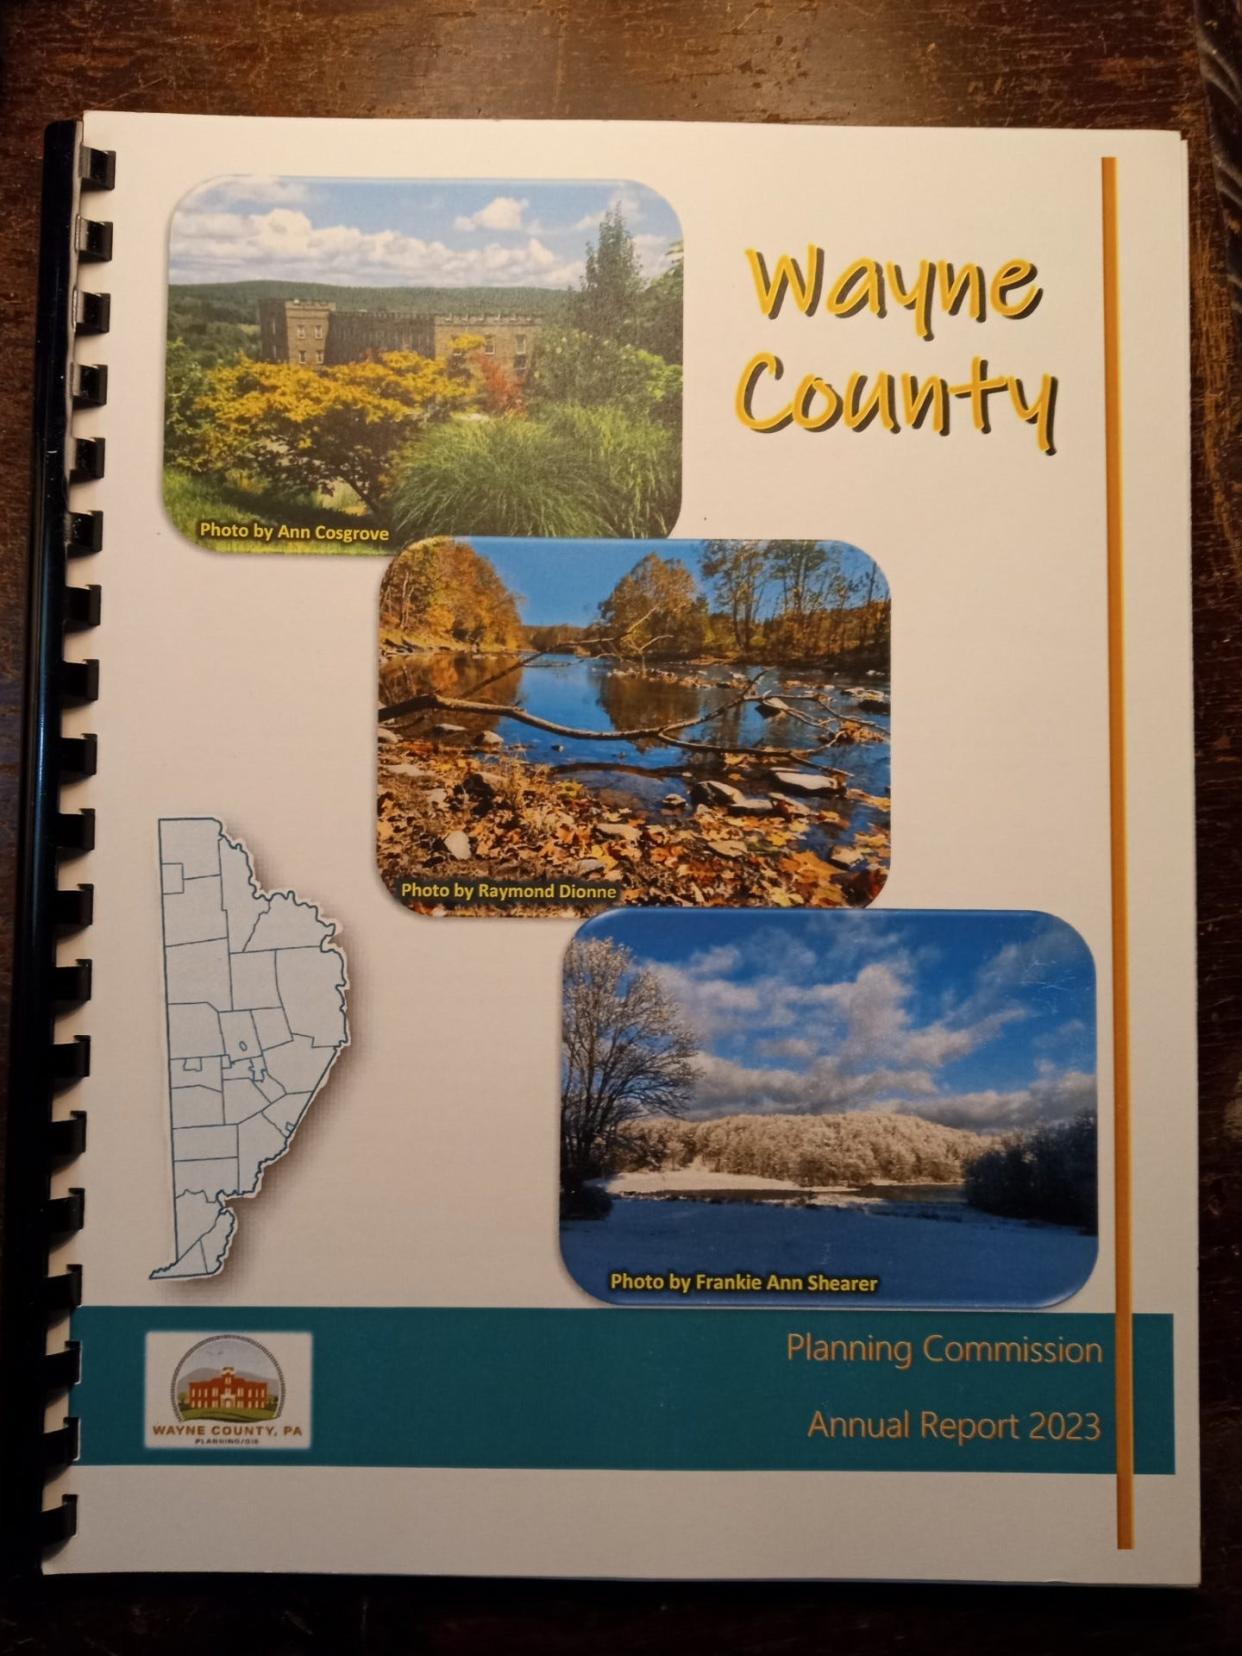 The Wayne County Planning Commission 2023 Annual Report has been released by the county commissioners. It my be viewed online at waynecountypa.gov/937/Planning-GIS.